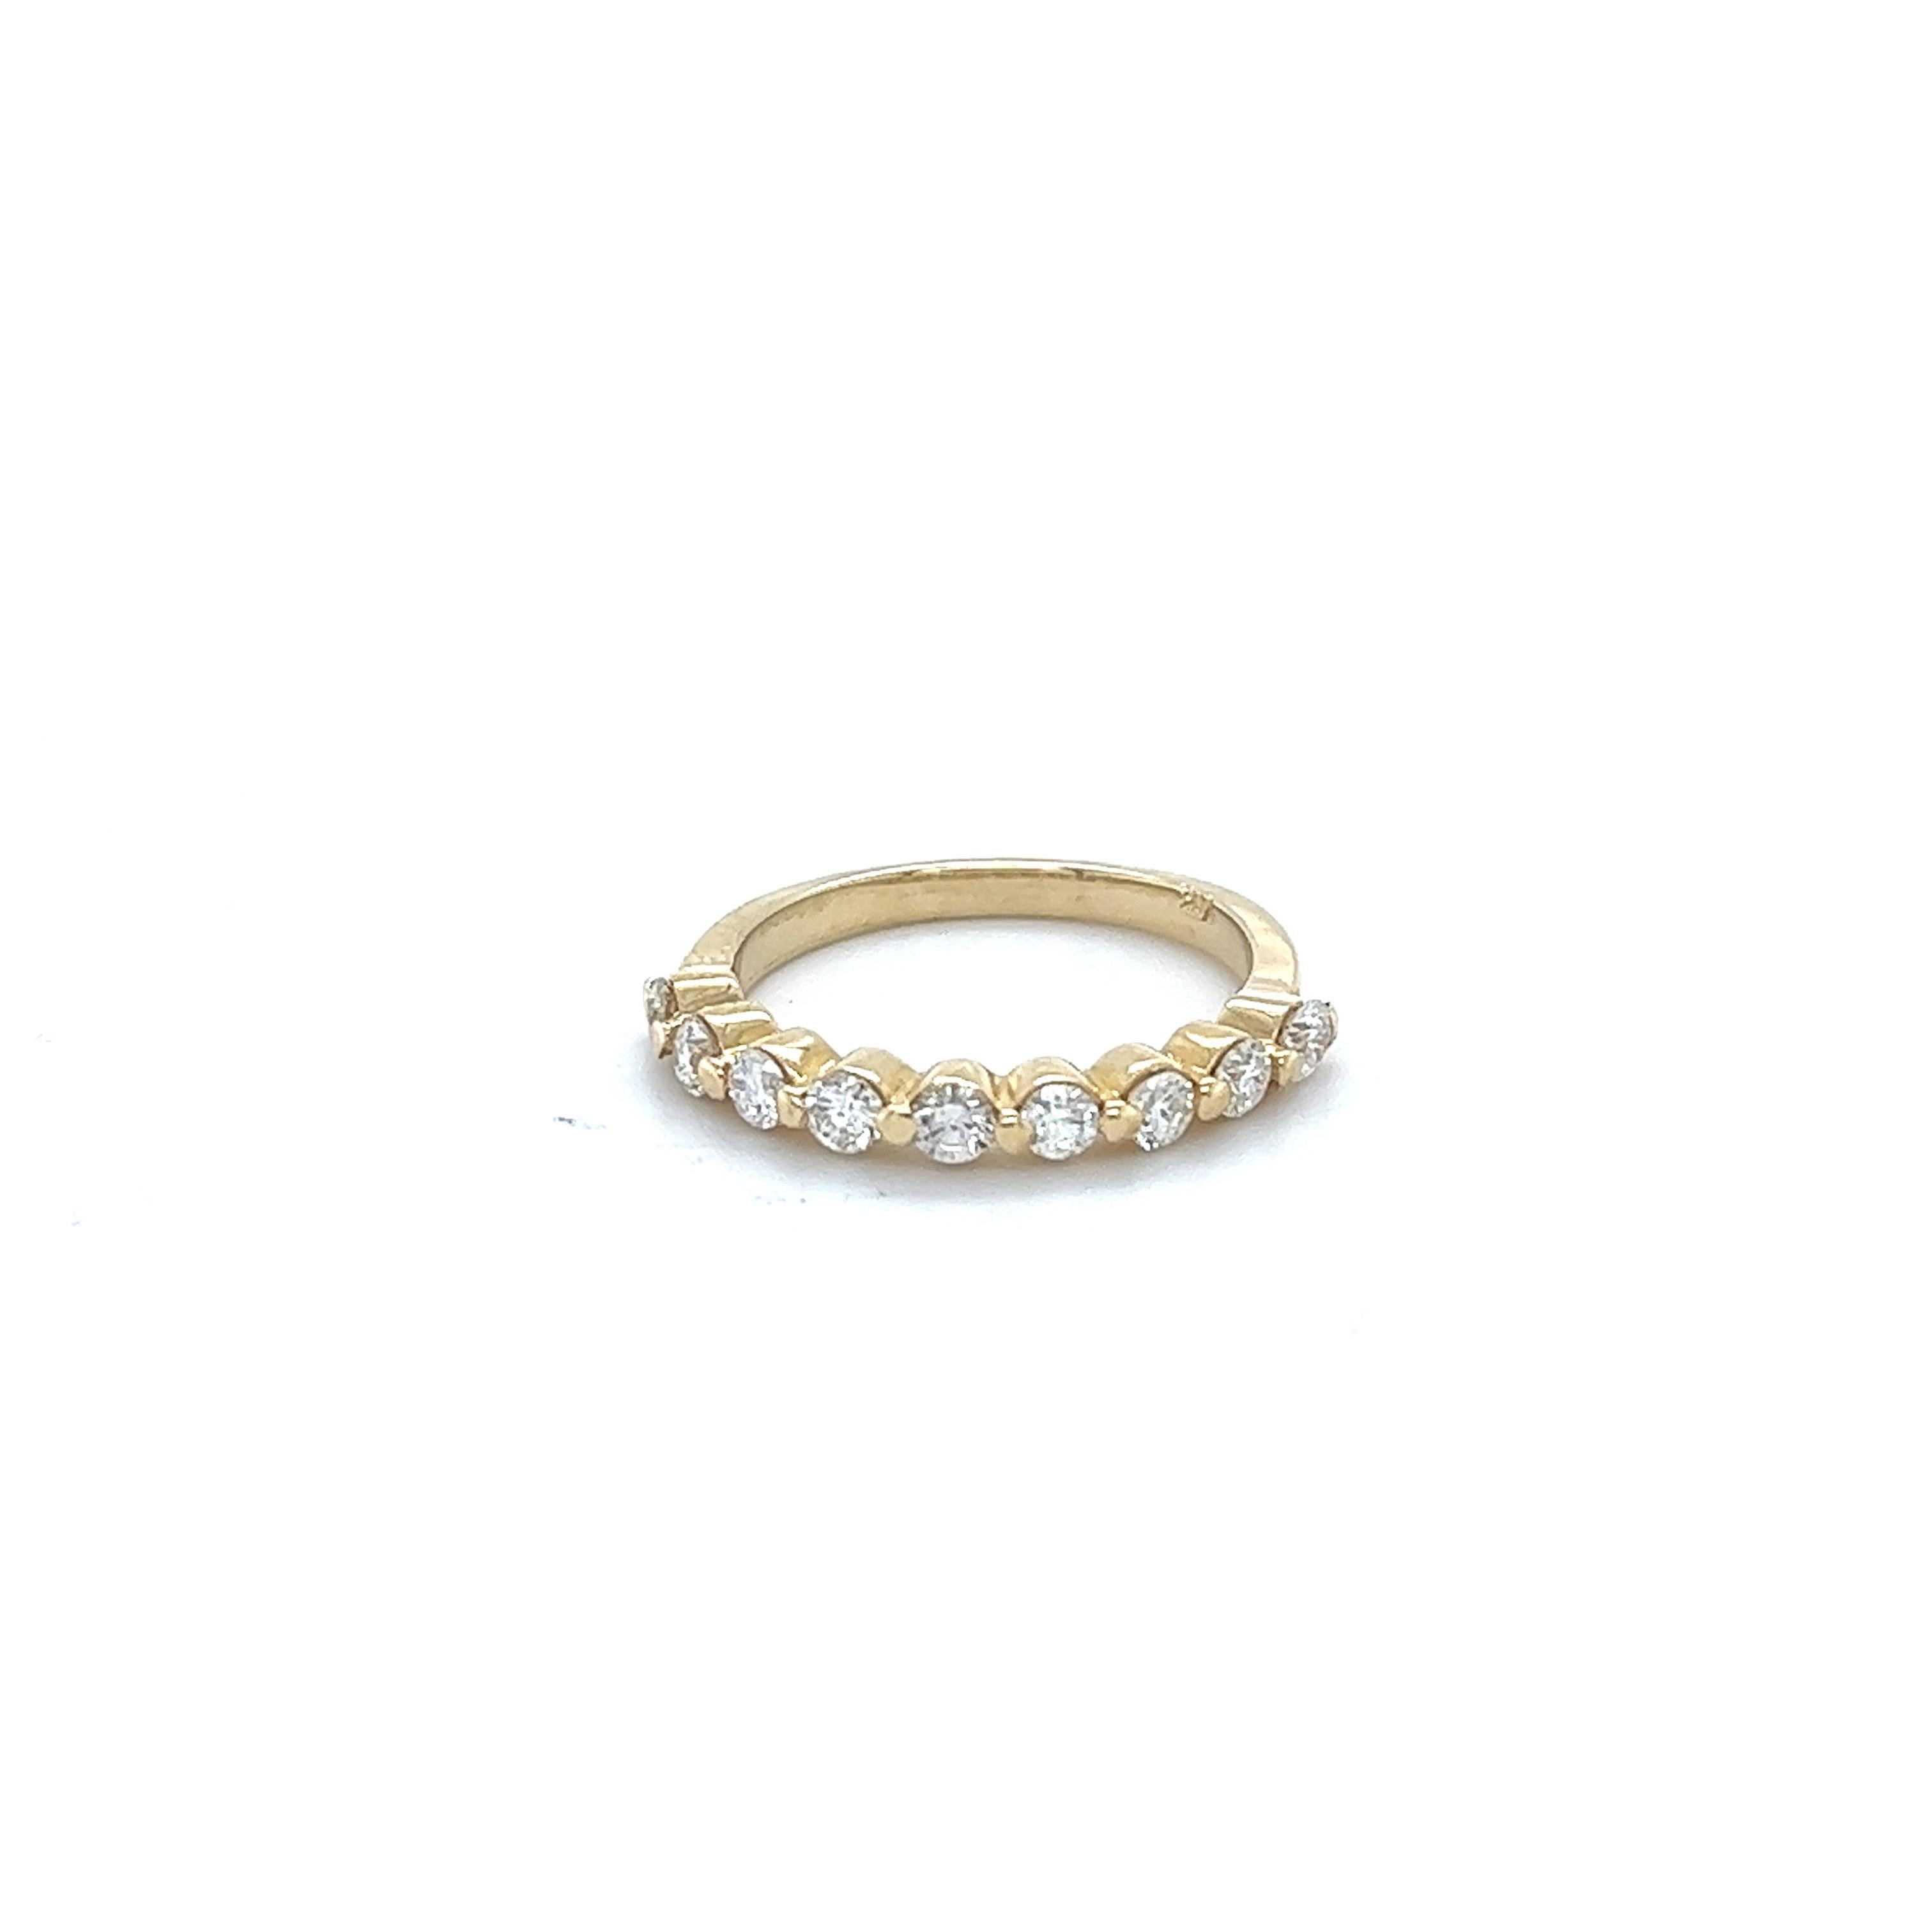 A beautiful band that can be worn as a single band or stack with other bands in other colors of Gold

This ring has 9 Round Cut Diamonds that weigh 0.60 Carats. The clarity and color of the diamonds are SI1-H.

Crafted in 14 Karat Yellow Gold and